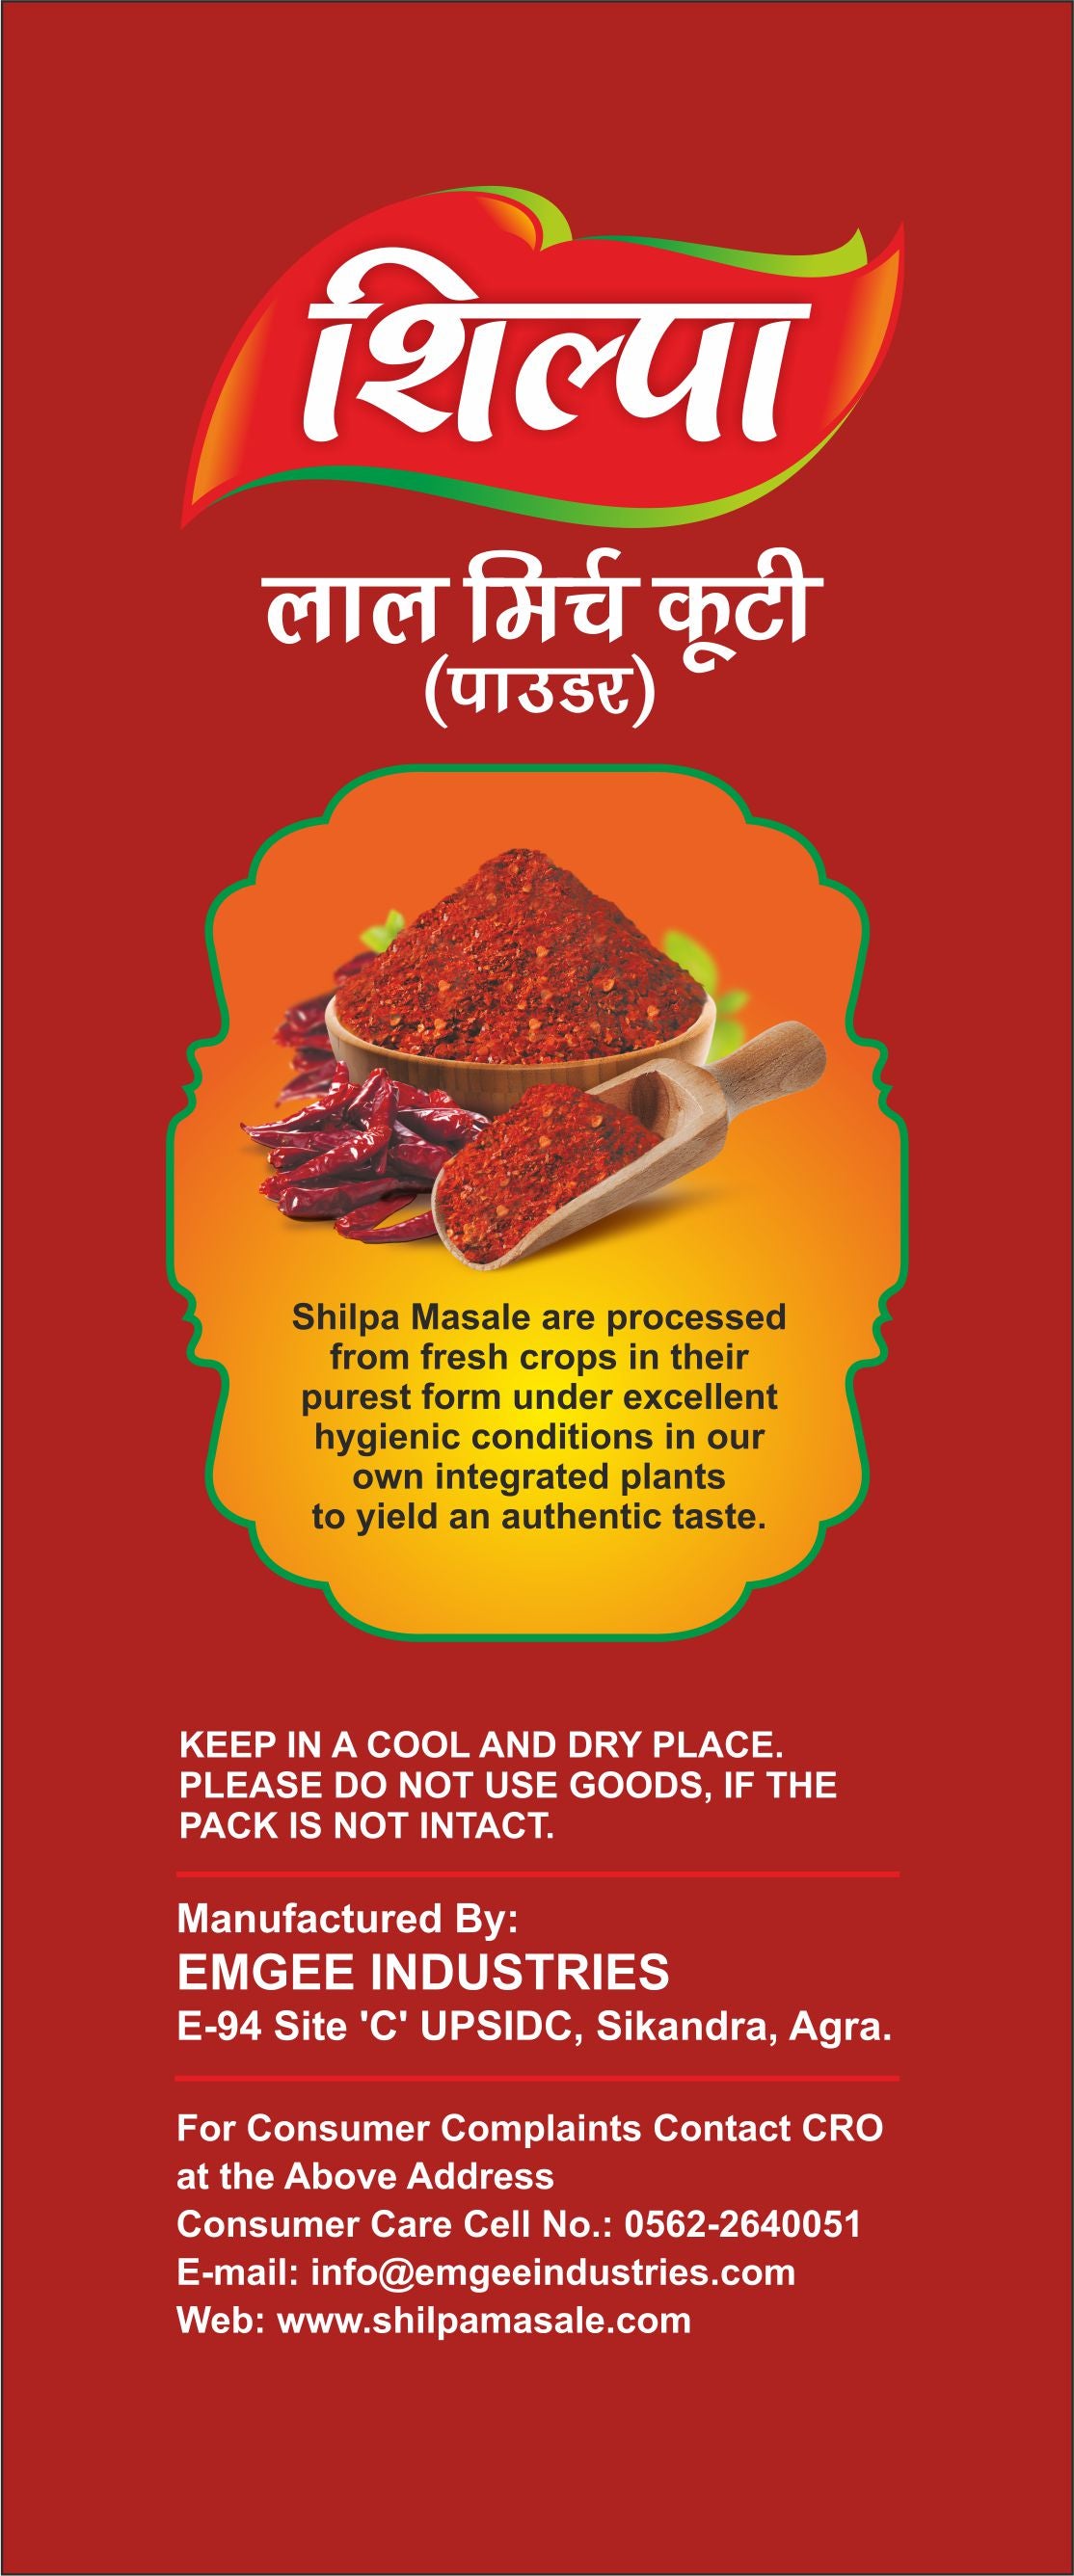 Shilpa Masale Kuti Lal Mirch (Crushed Red Chilli) Powder Spices 500g Pouch